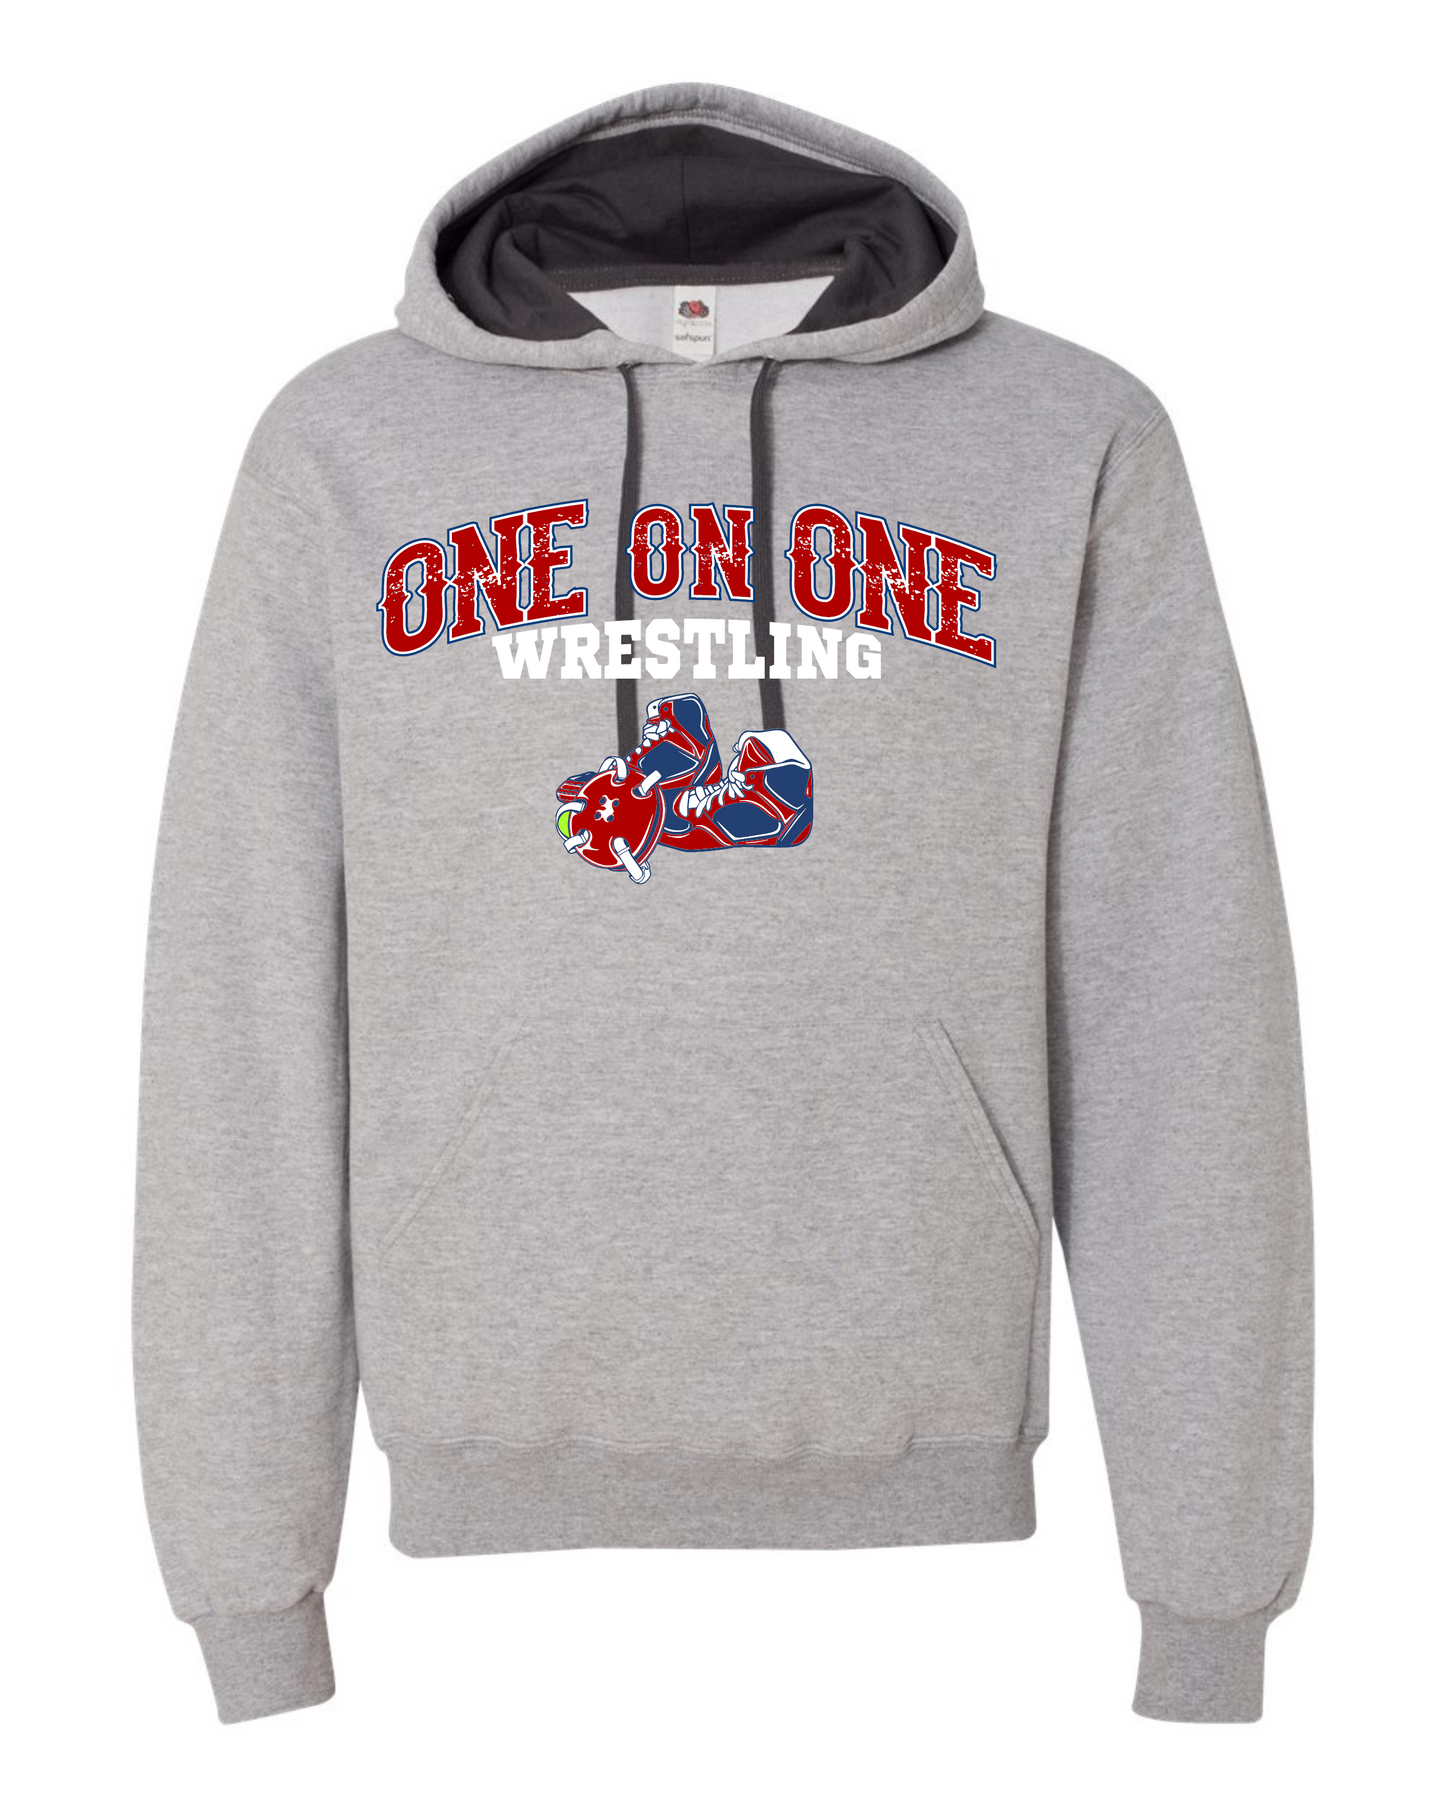 One on One Wrestling Hoodie - Grey - Adult and Youth Sizes - Hooded Sweatshirt